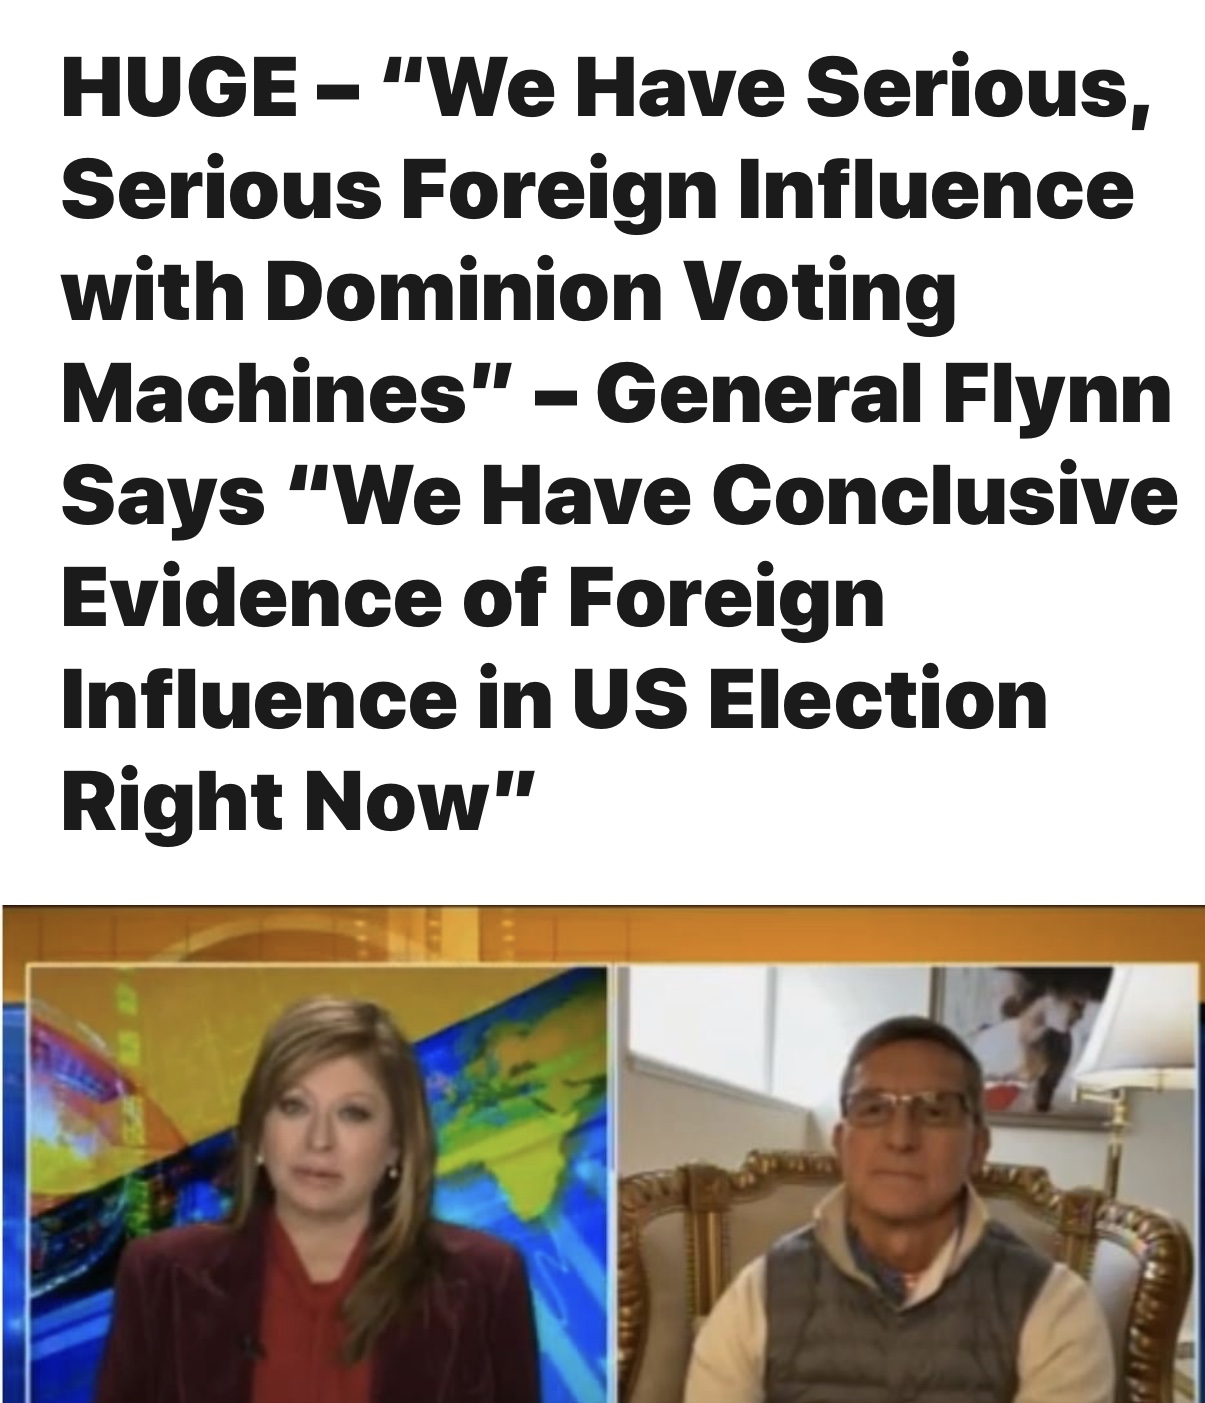 General Flynn Says “We Have Conclusive Evidence of Foreign Influence in US Election Right Now” 130 Views